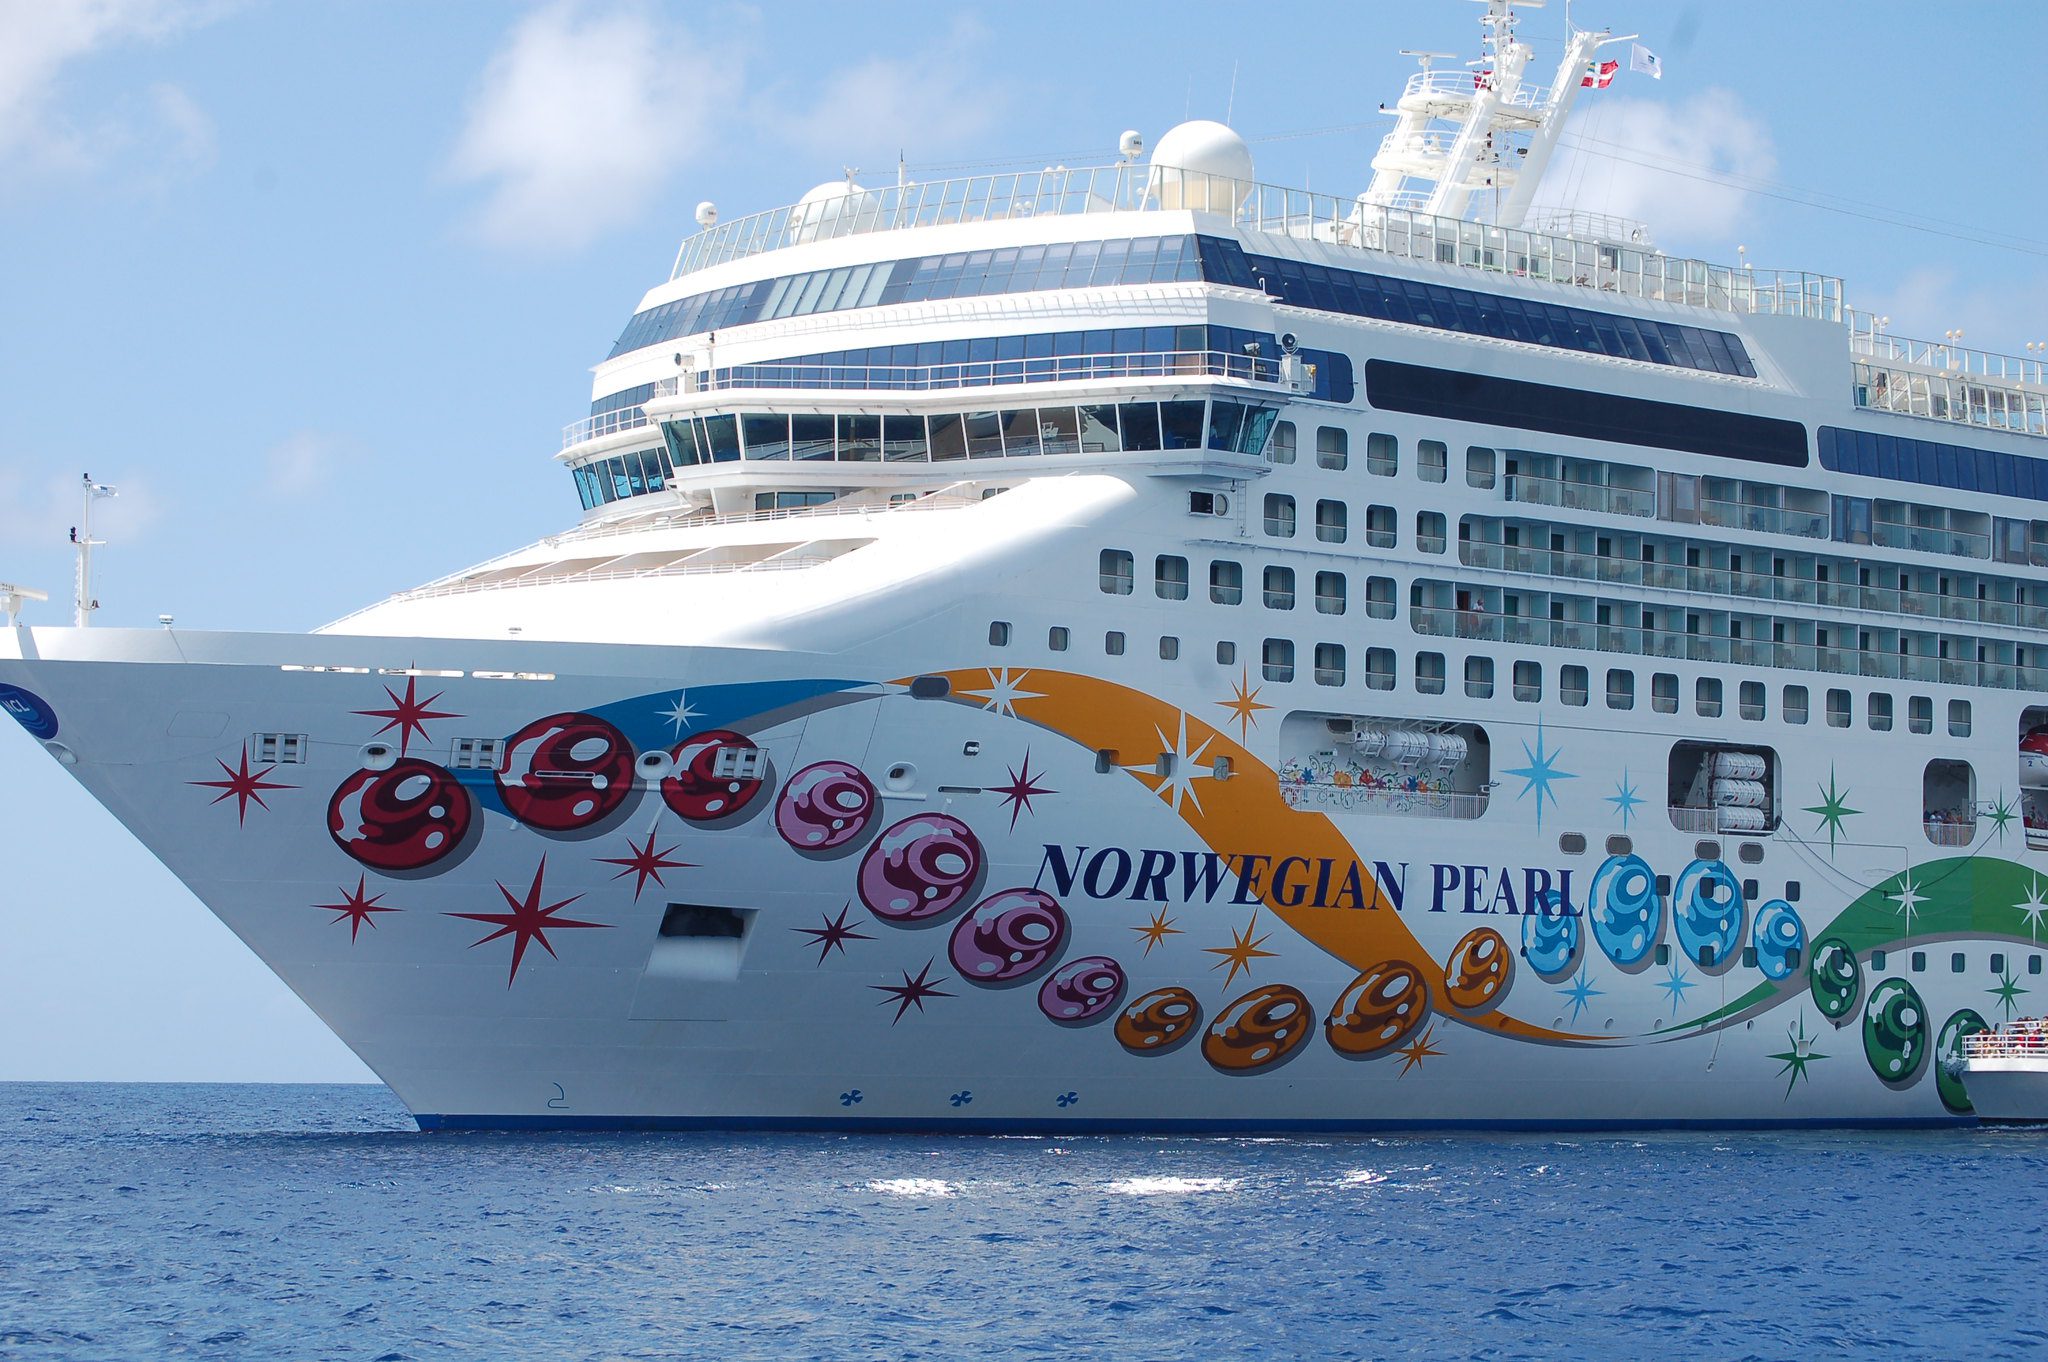 Norwegian Cruise Line has cut short a 12-day round trip from Miami on its Norwegian Pearl ship.